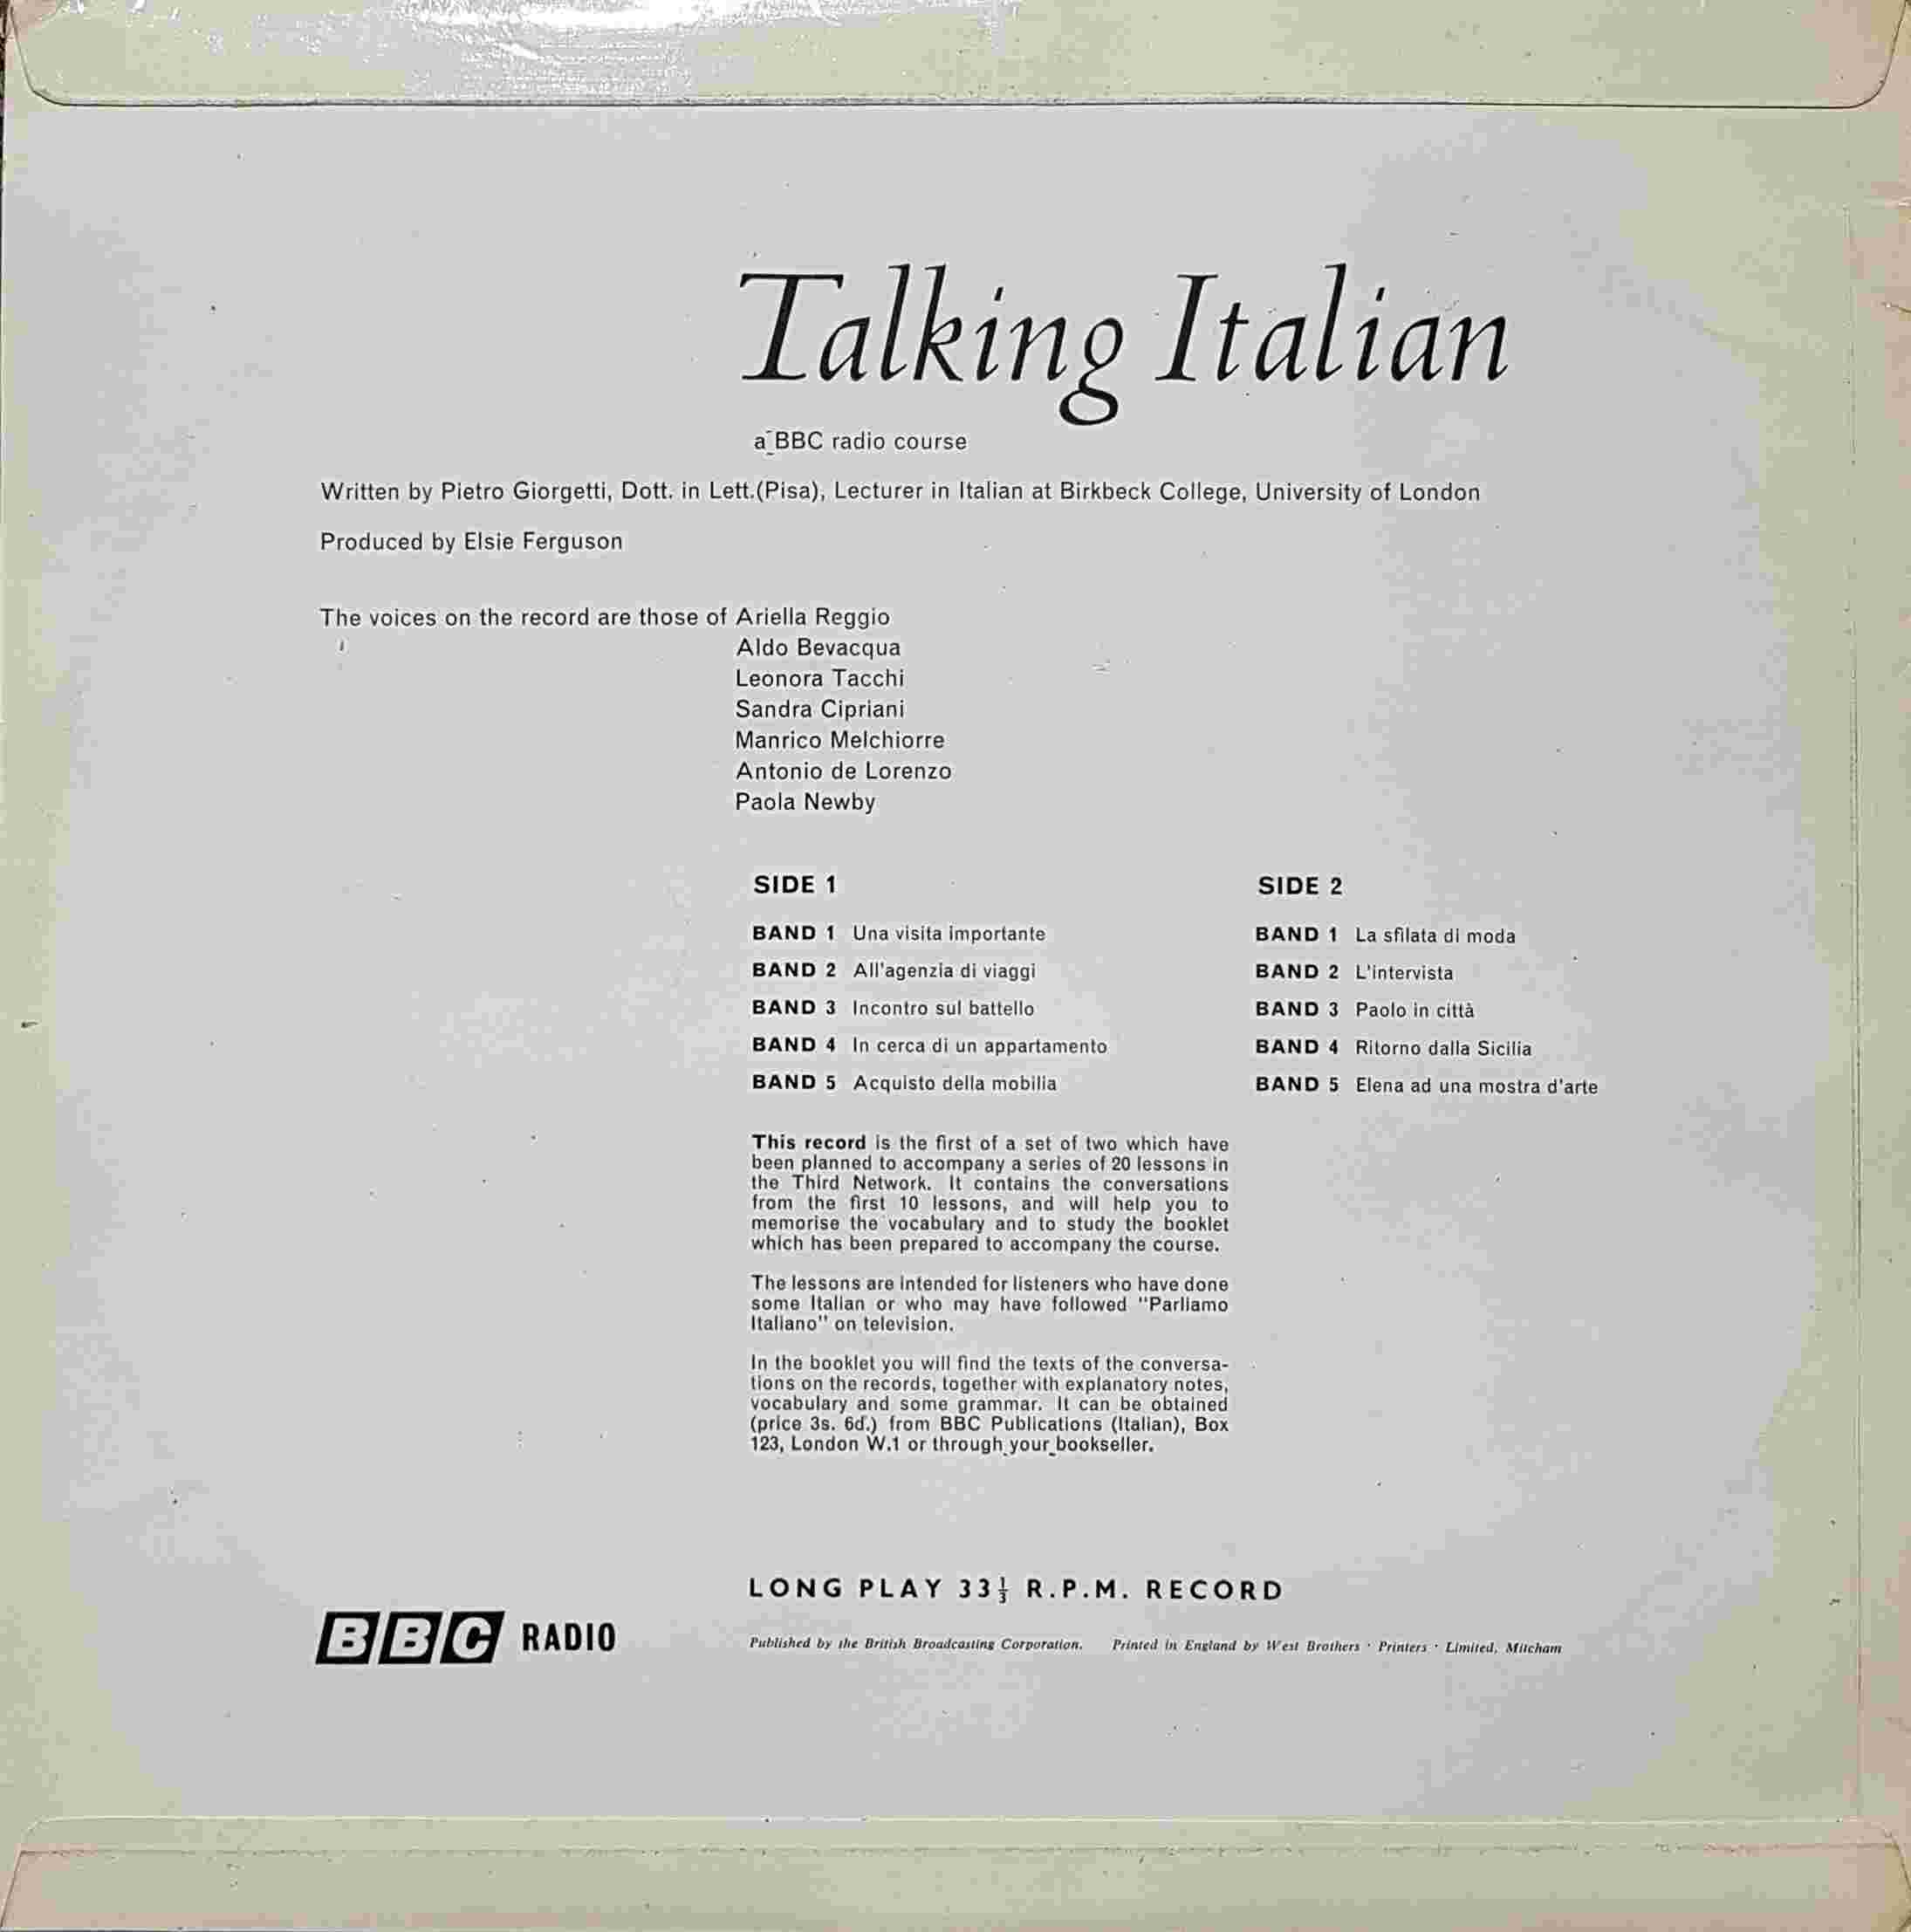 Picture of OP 31/32 Talking Italian - Lessons 1 - 10 by artist Pietro Giorgetti from the BBC records and Tapes library